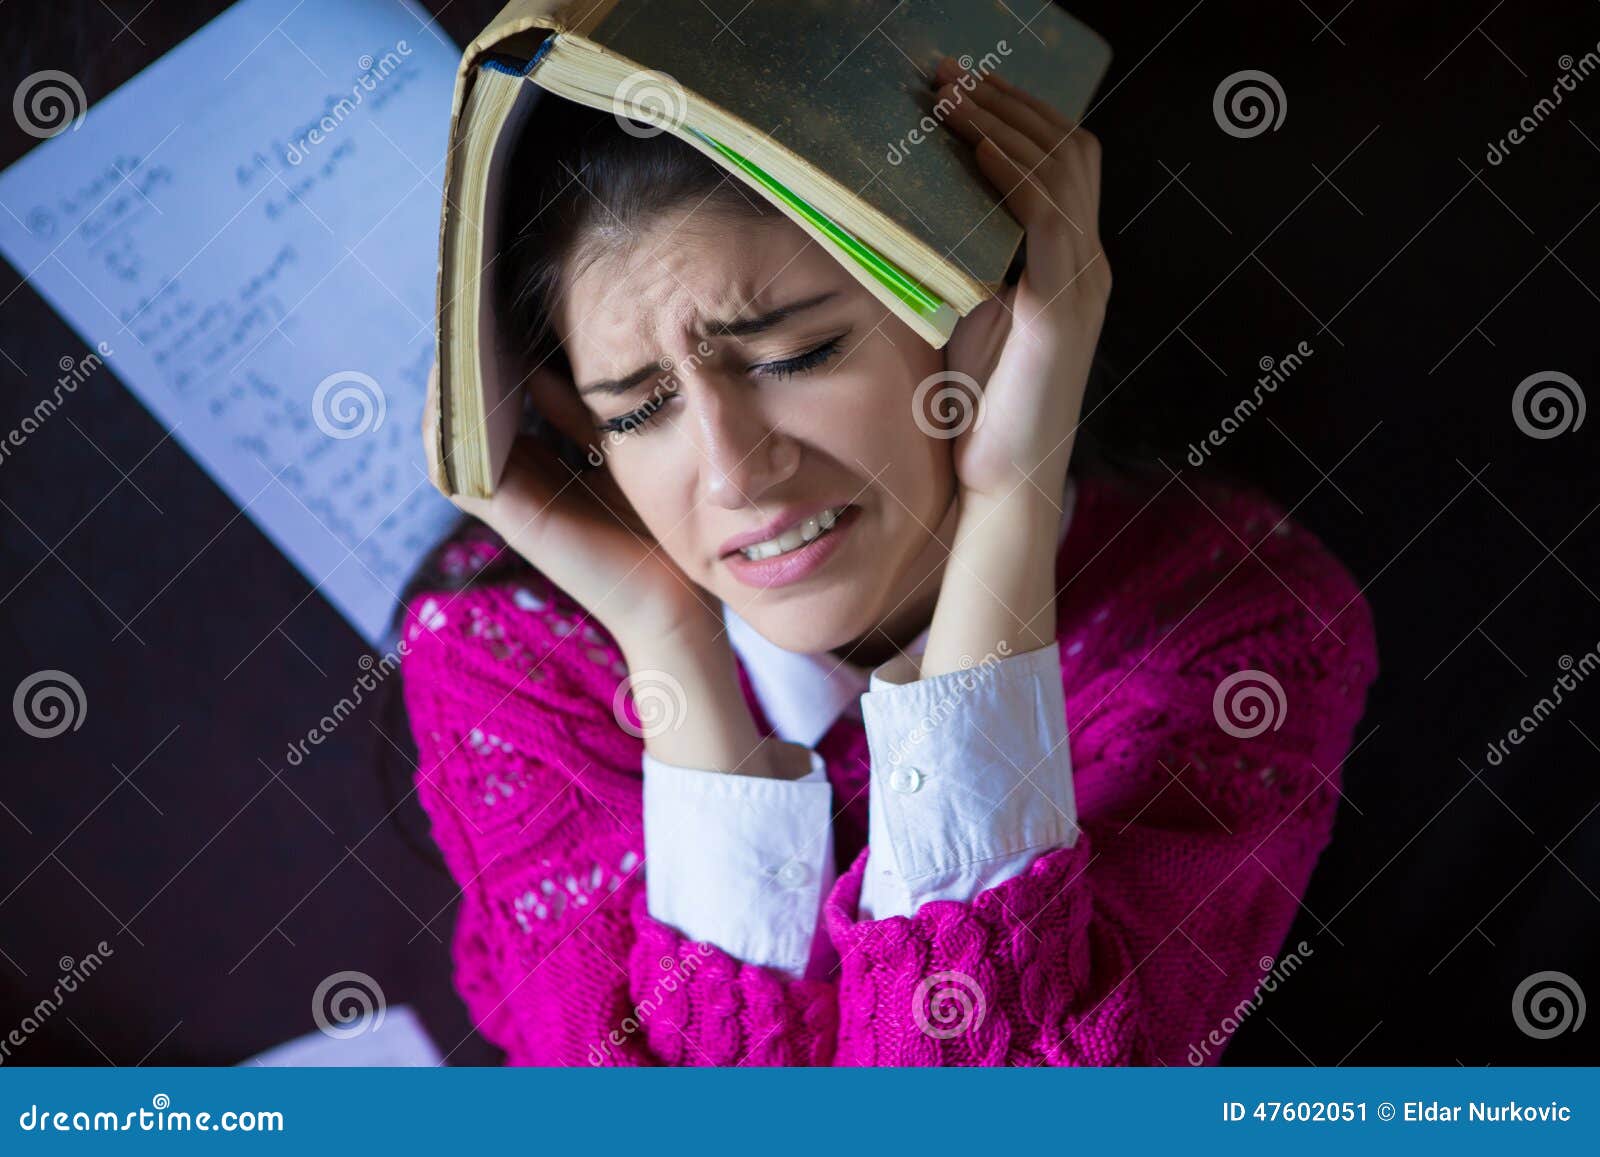 Funny Looking Brunette Woman Student Trying To Study in Her Room ...